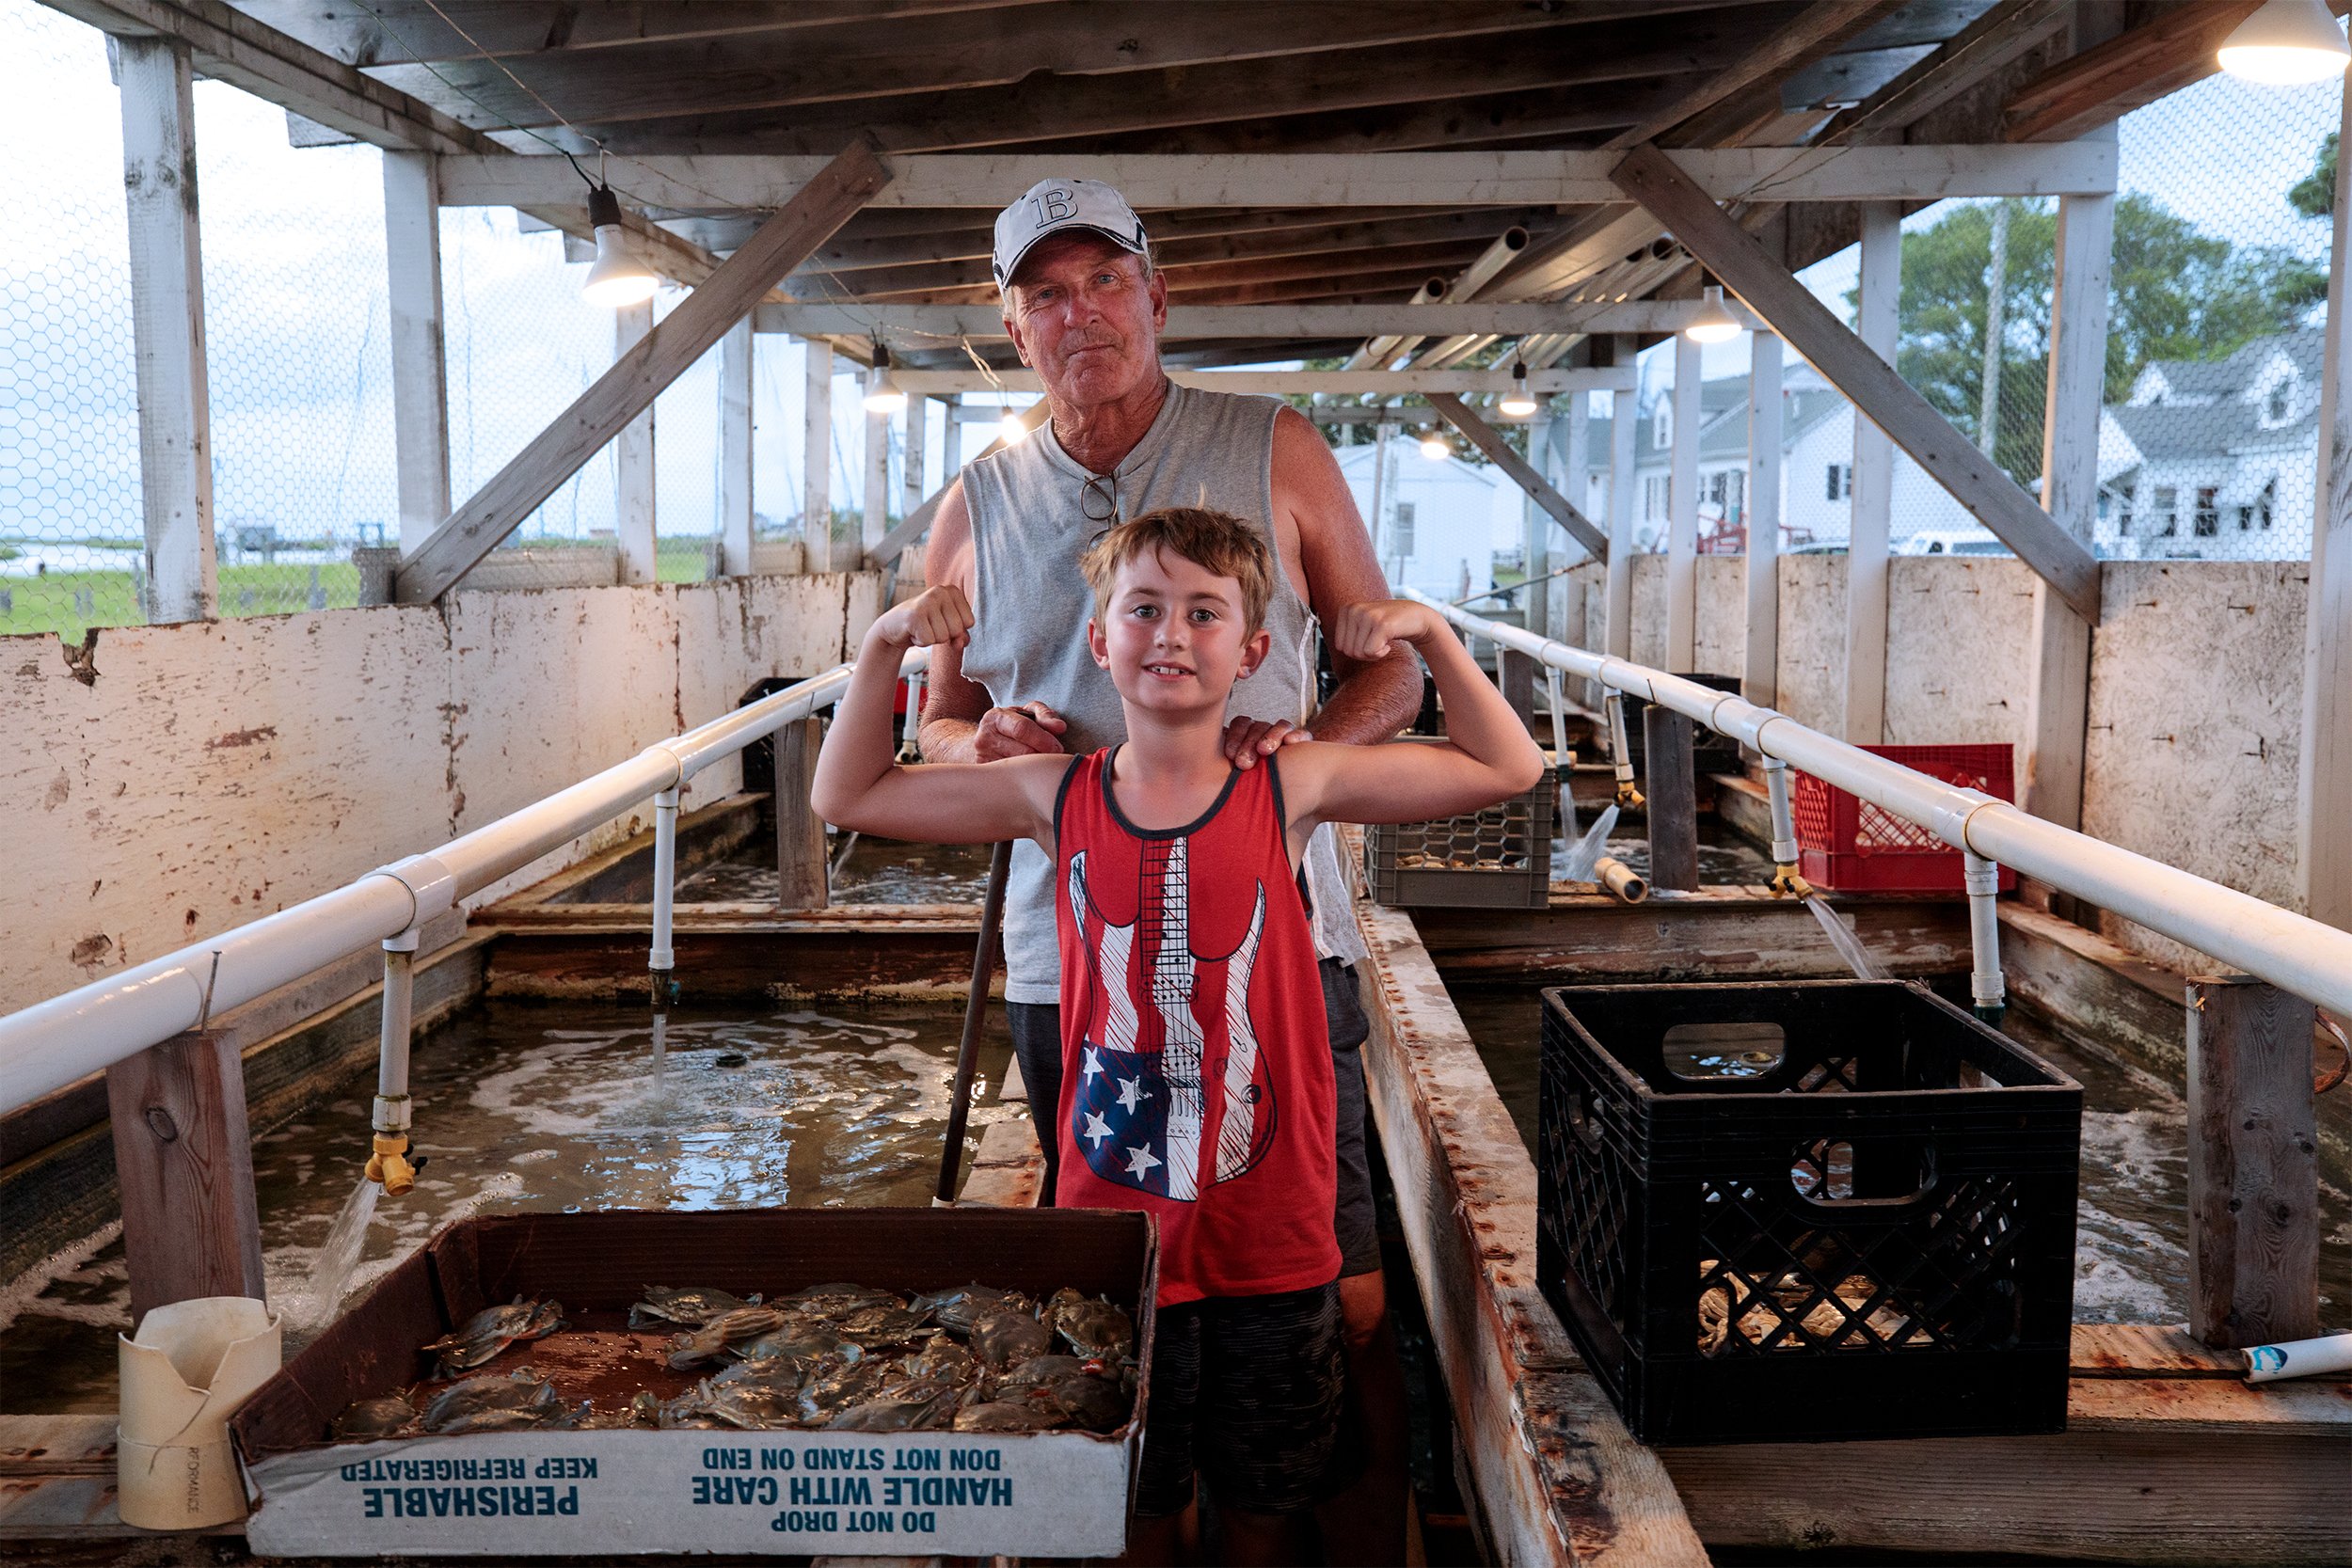  John Tyler, 64, and his grandson, Levi Somers, 8, stand for a portrait in Tyler’s crab shanty on Smith Island. Tyler started working the water at 11 years old, obtained his first boat at 15, and was working on his own at 16. Throughout his years on 